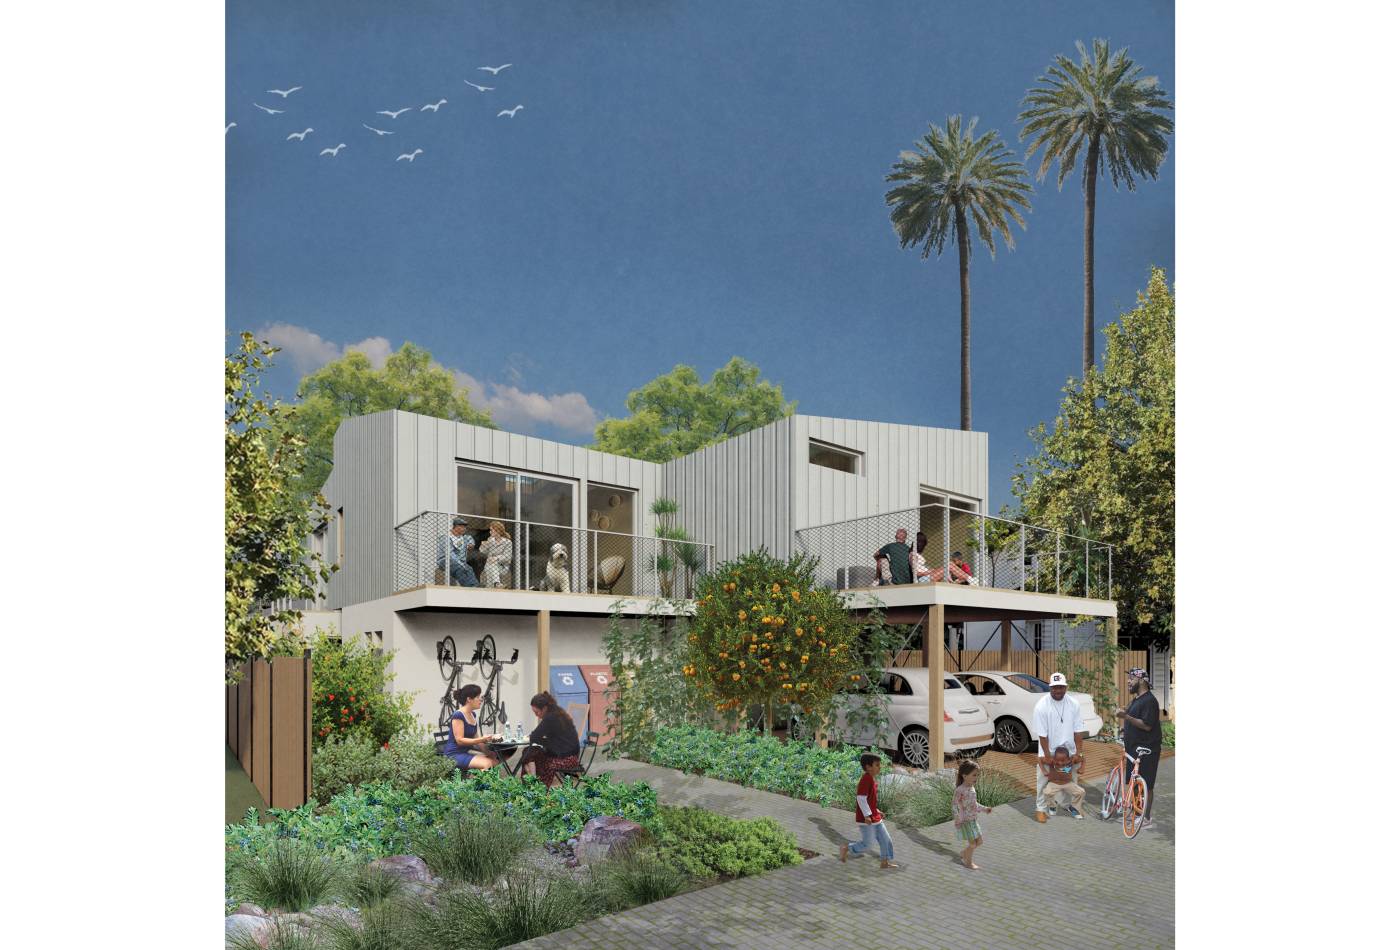 Omgivning and Studio MLA teamed up to win second place in the Subdivision category of the Low-Rise design competition. 

This design challenge was organized by the Office of Los Angeles Mayor Eric Garcetti and the Chief Design Officer for the City of Los Angeles, Christopher Hawthorne. It received a total of 380 submissions from around the world, responding to a brief with four categories: Corners, Fourplex (1st Place, Omgivning), (Re)Distribution, and Subdivision (2nd Place, Omgivning).

Details on the categories, as well as the community-engagement listening sessions that were required viewing for all entrants, can be found at [www.lowrise.la](https://www.lowrise.la).